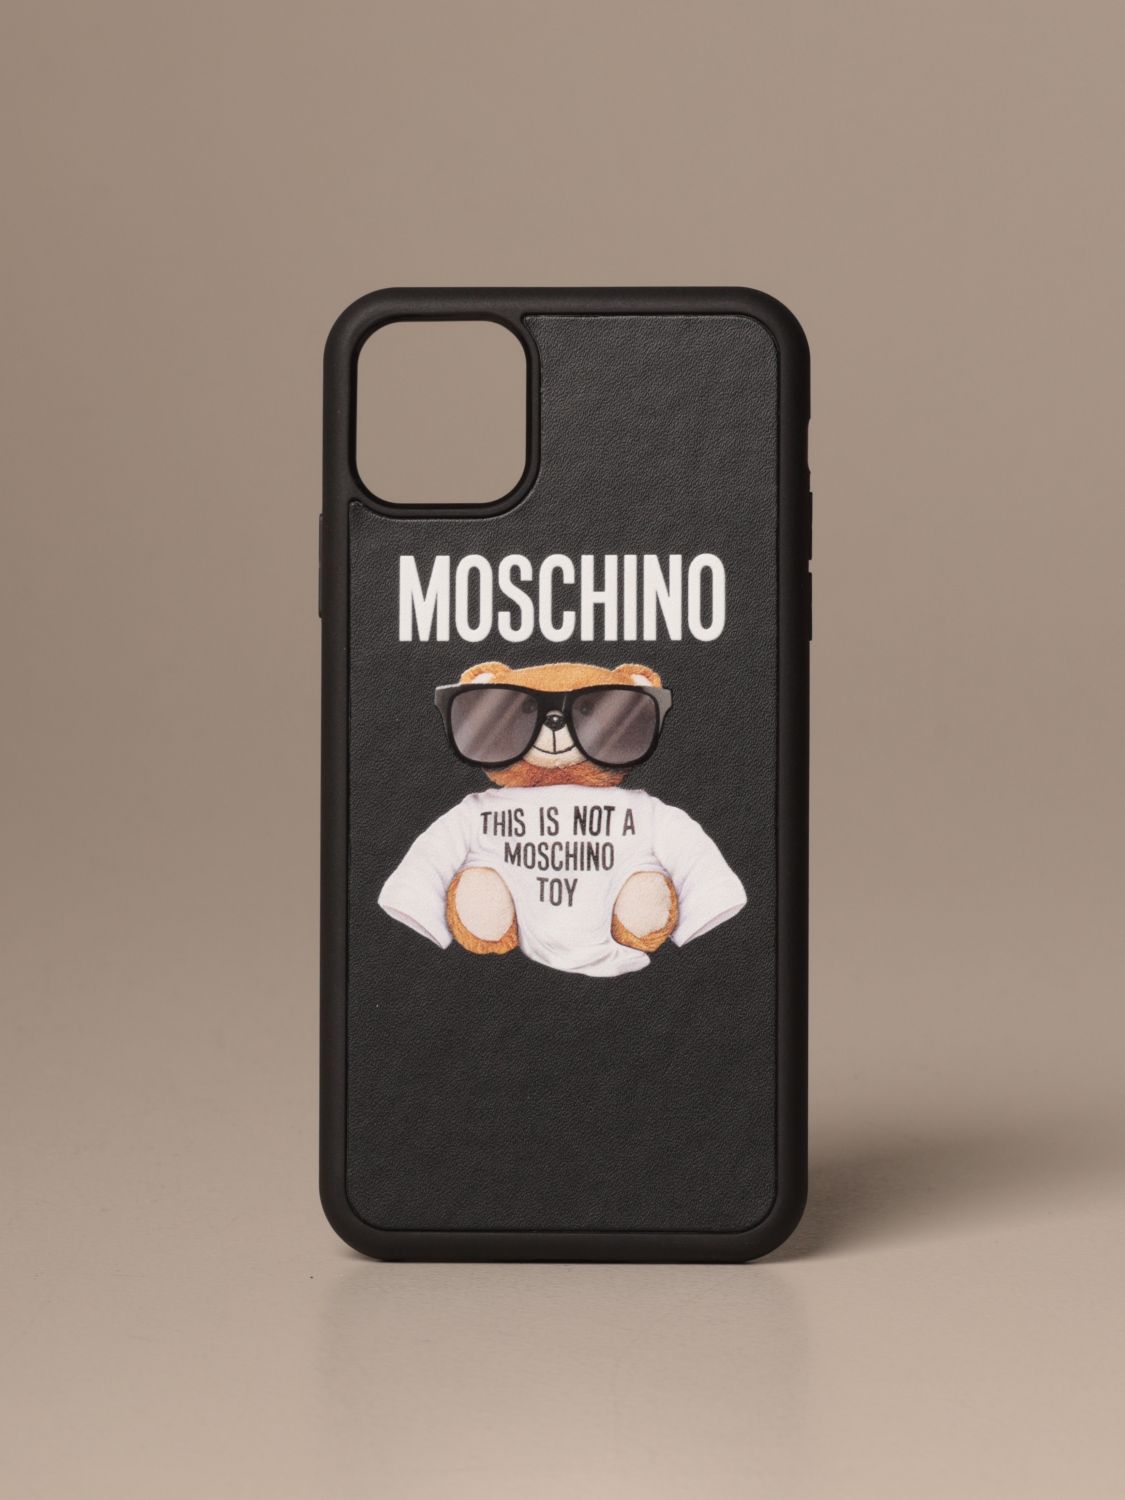 Moschino Couture Iphone 11 Pro Max Teddy Cover Case Moschino Couture Women Black Case Moschino Couture 7905 08 Giglio En